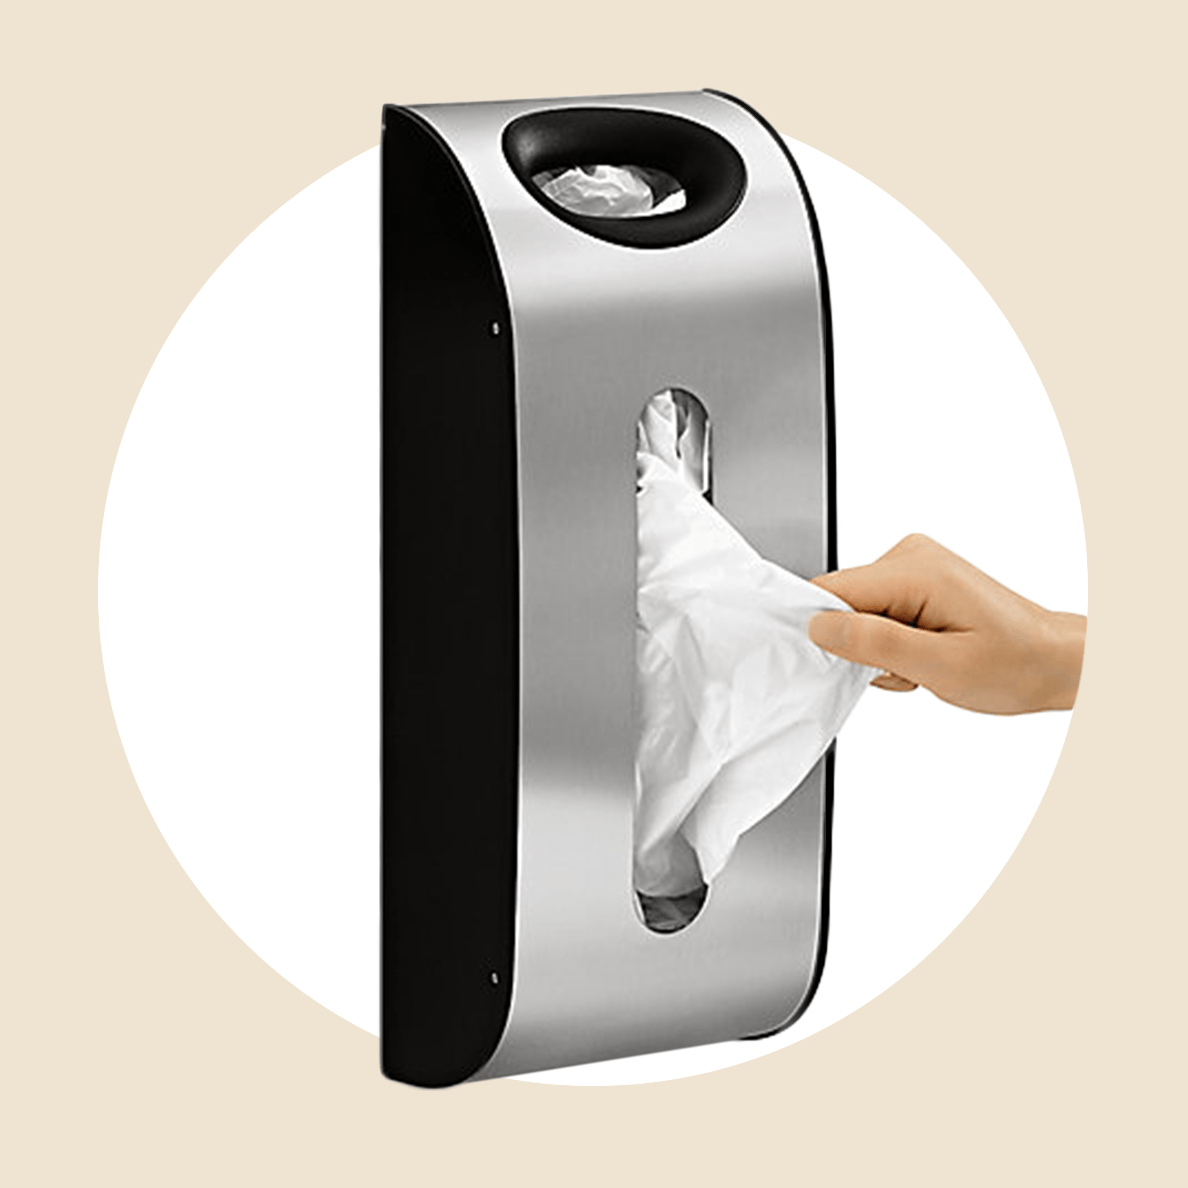 The Simplehuman Cabinet Mount Grocery Bag Can Will Help You Recycle Your  Plastic Grocery Bag - Green Design Blog